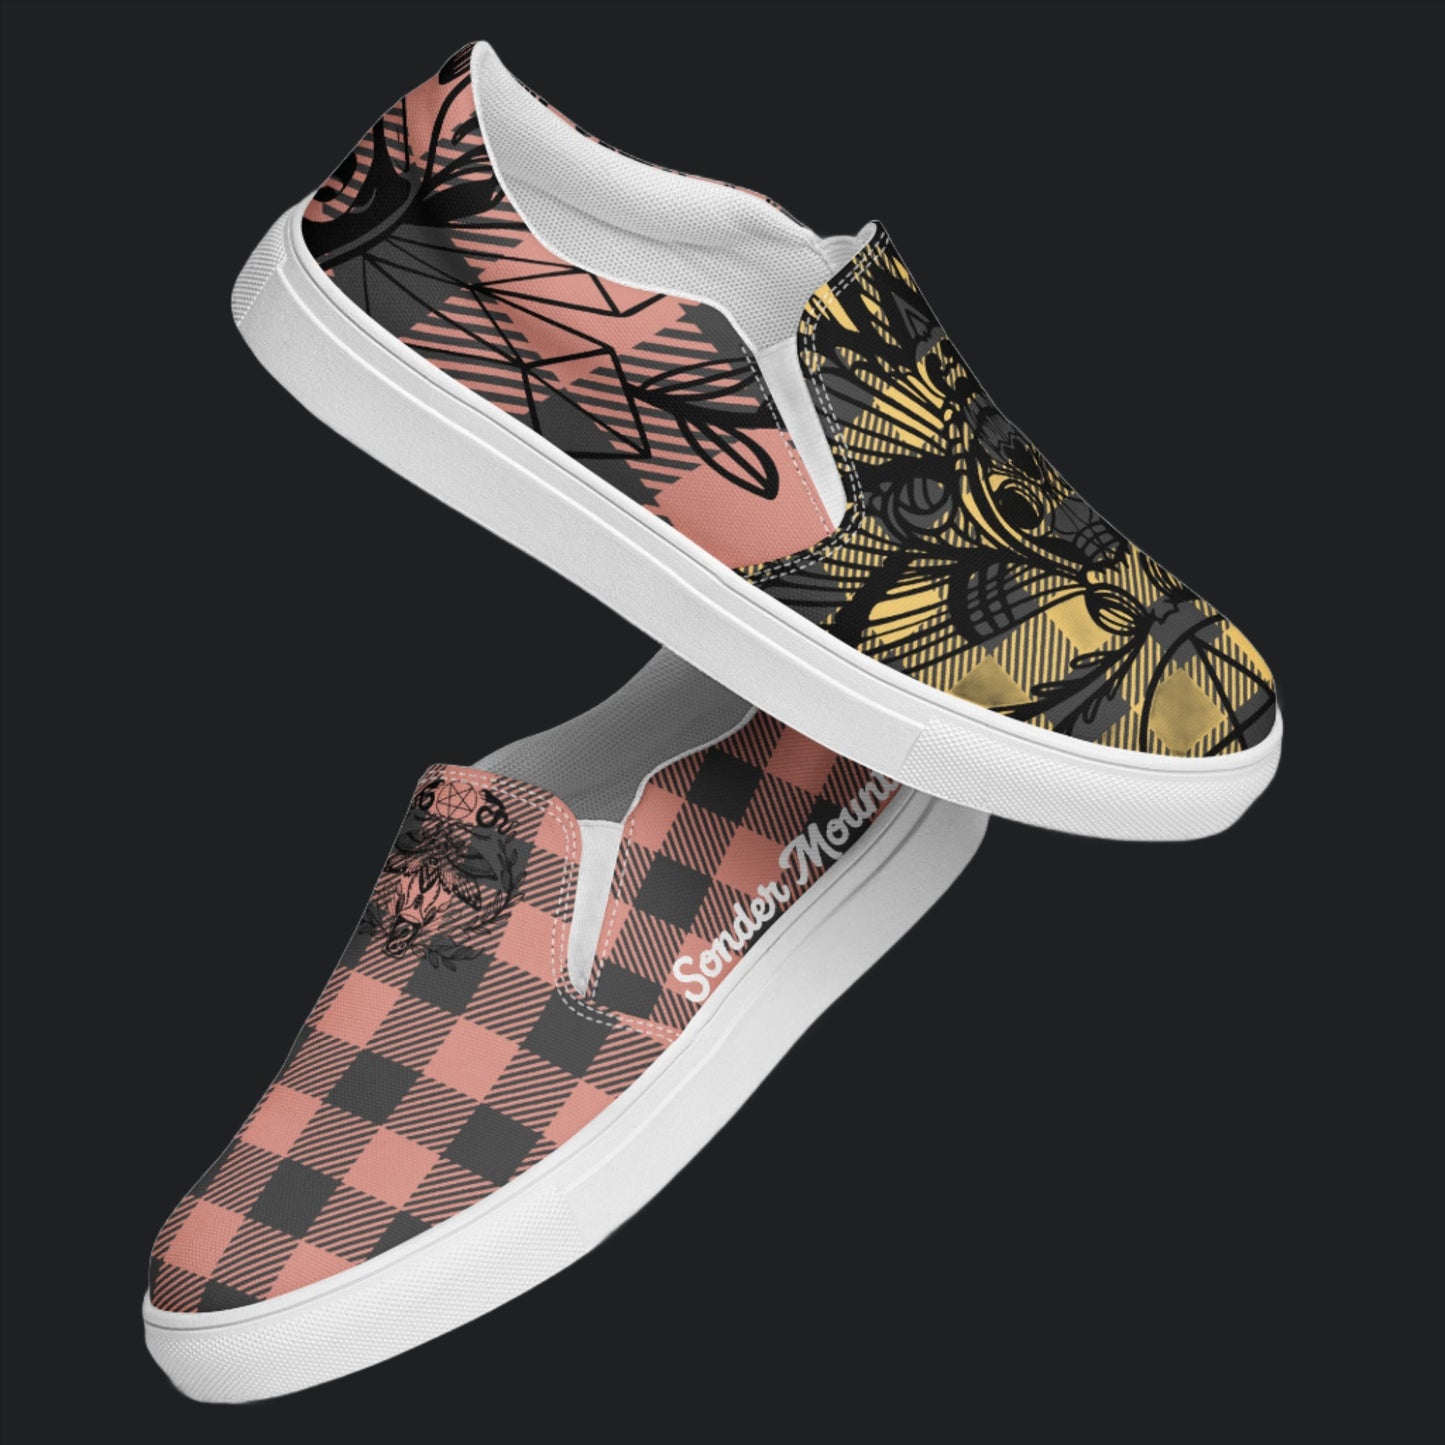 The Moth Piper - Women’s slip-on canvas shoes